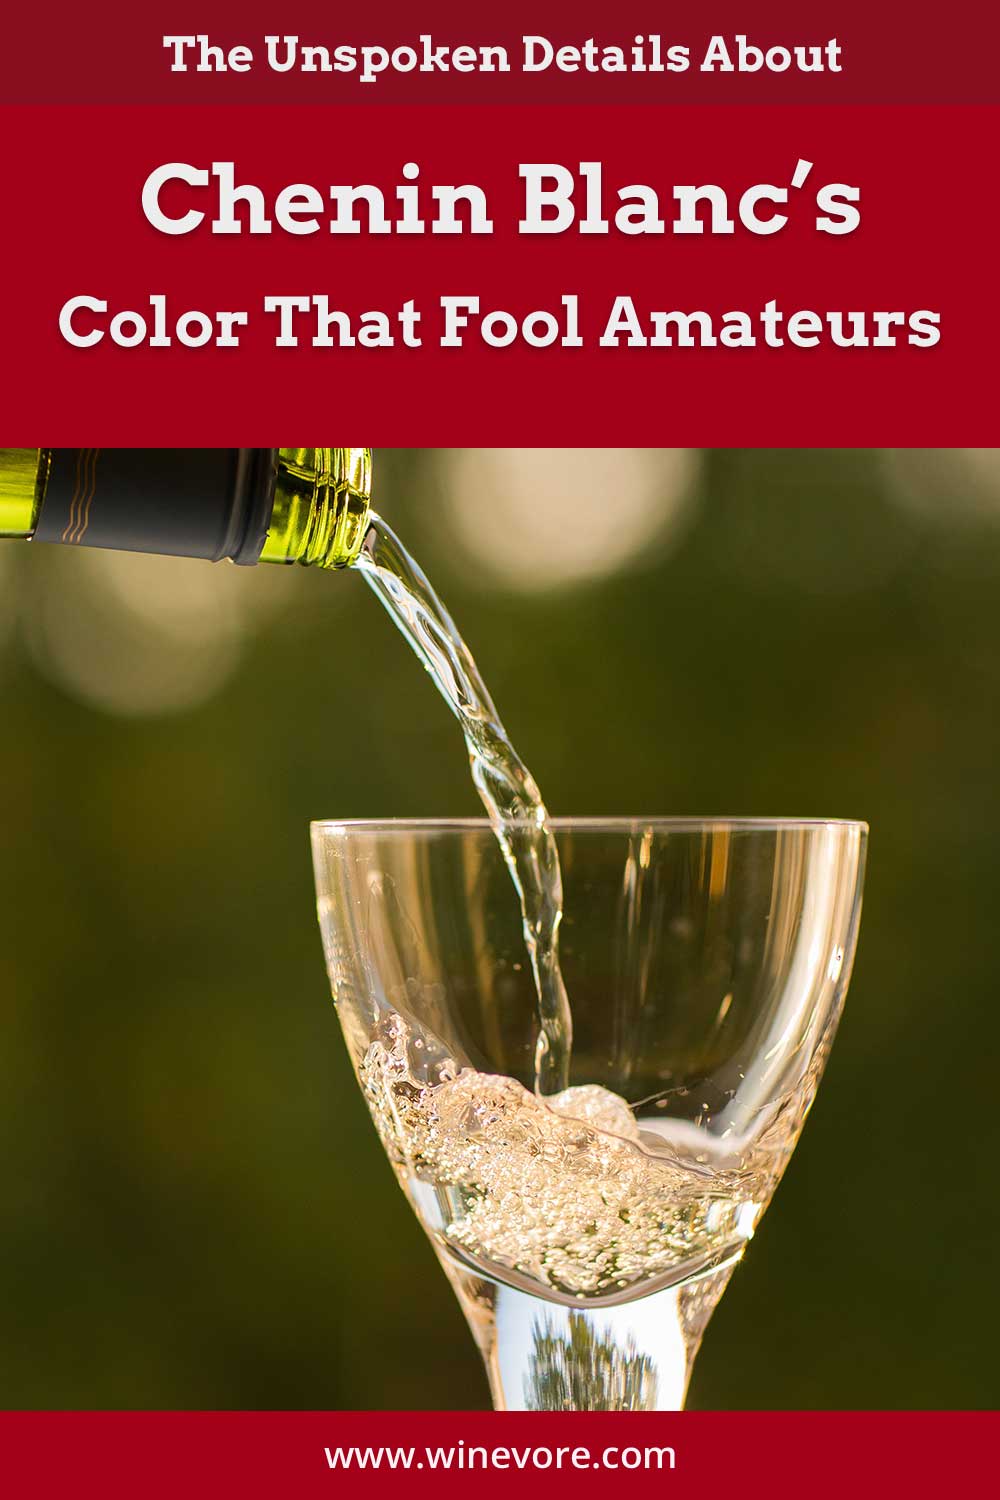 Wine being poured into a small wine glass - Details About Chenin Blanc's Color.